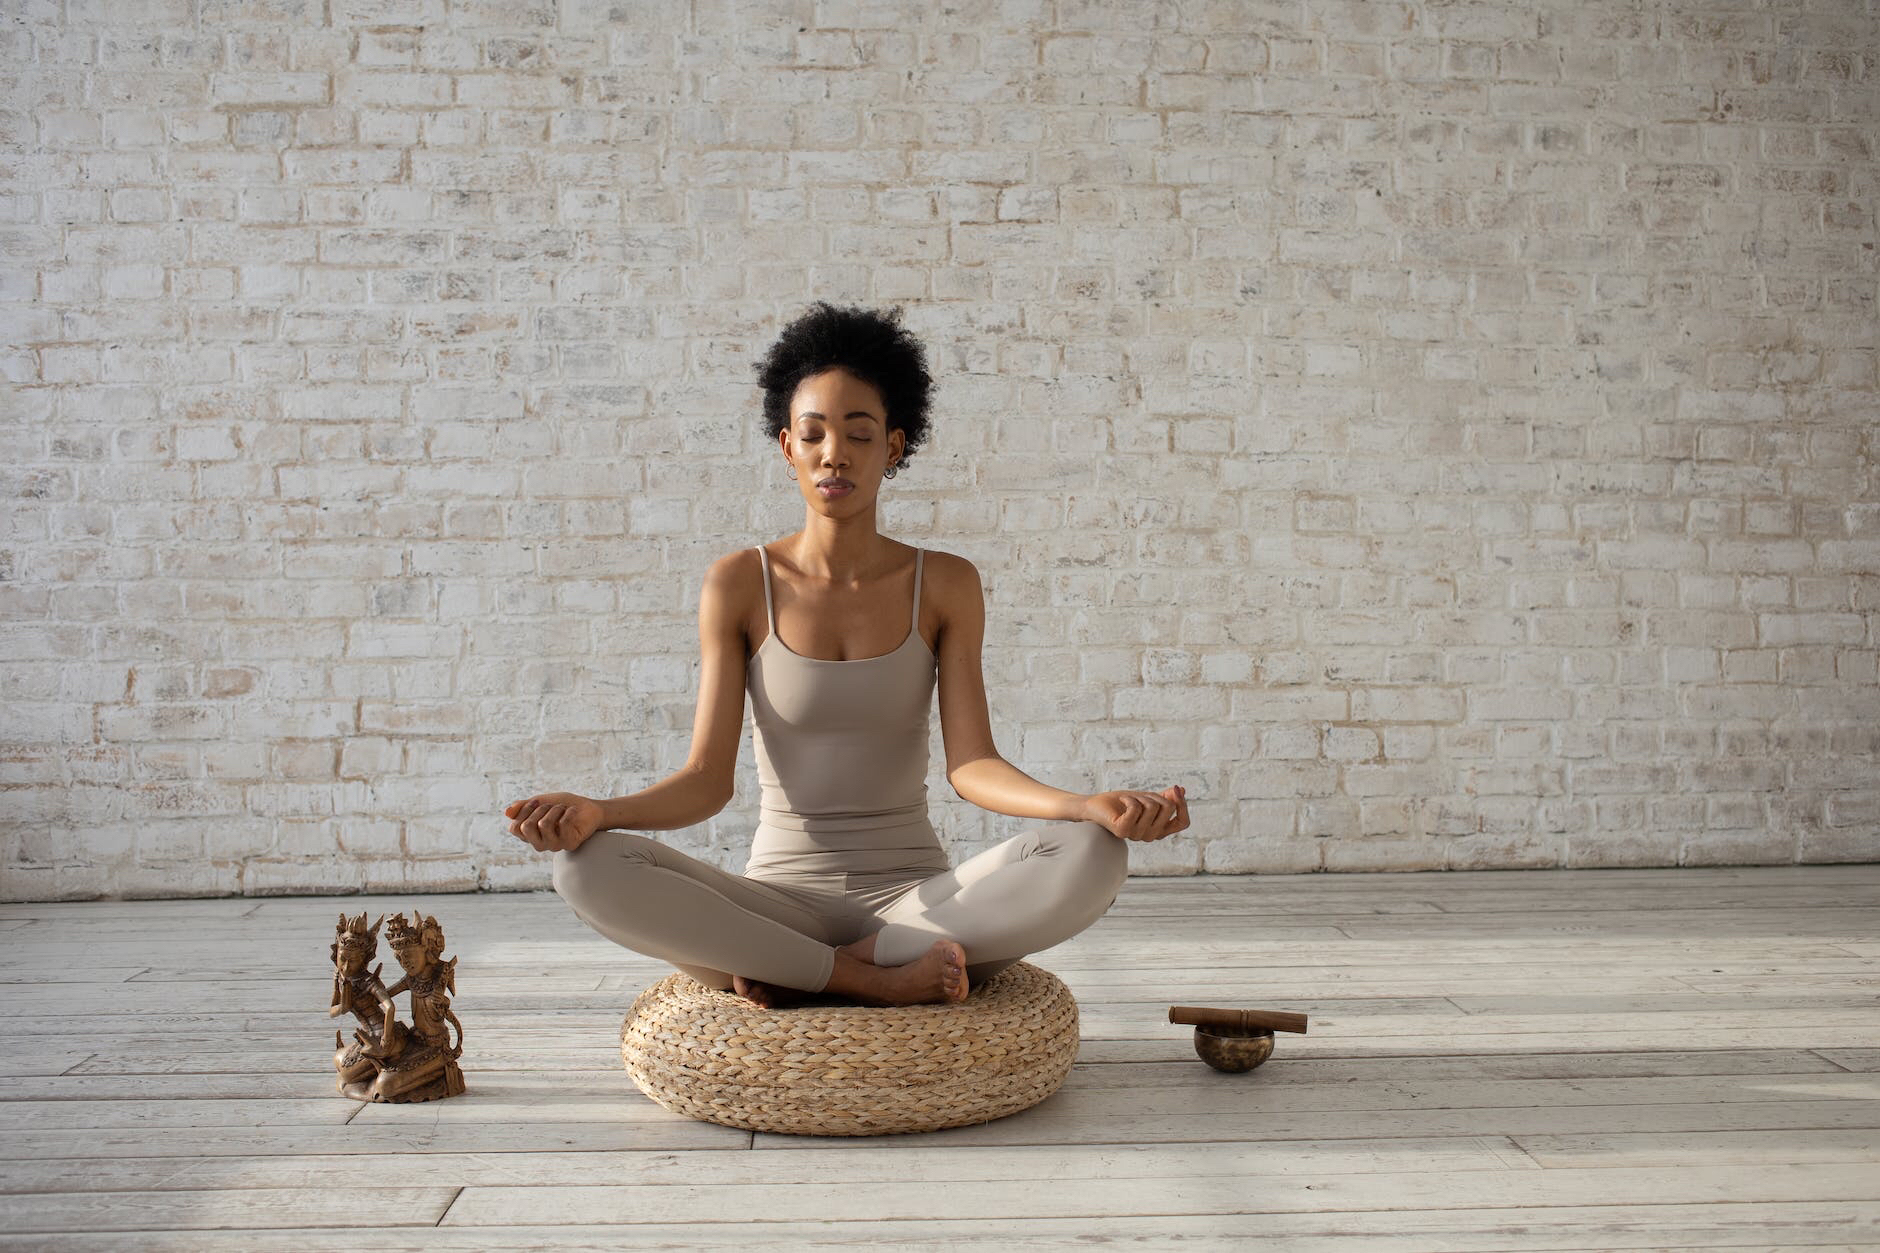 Woman meditating on a woven straw cushion in the lotus position in front of a whitewashed brick wall